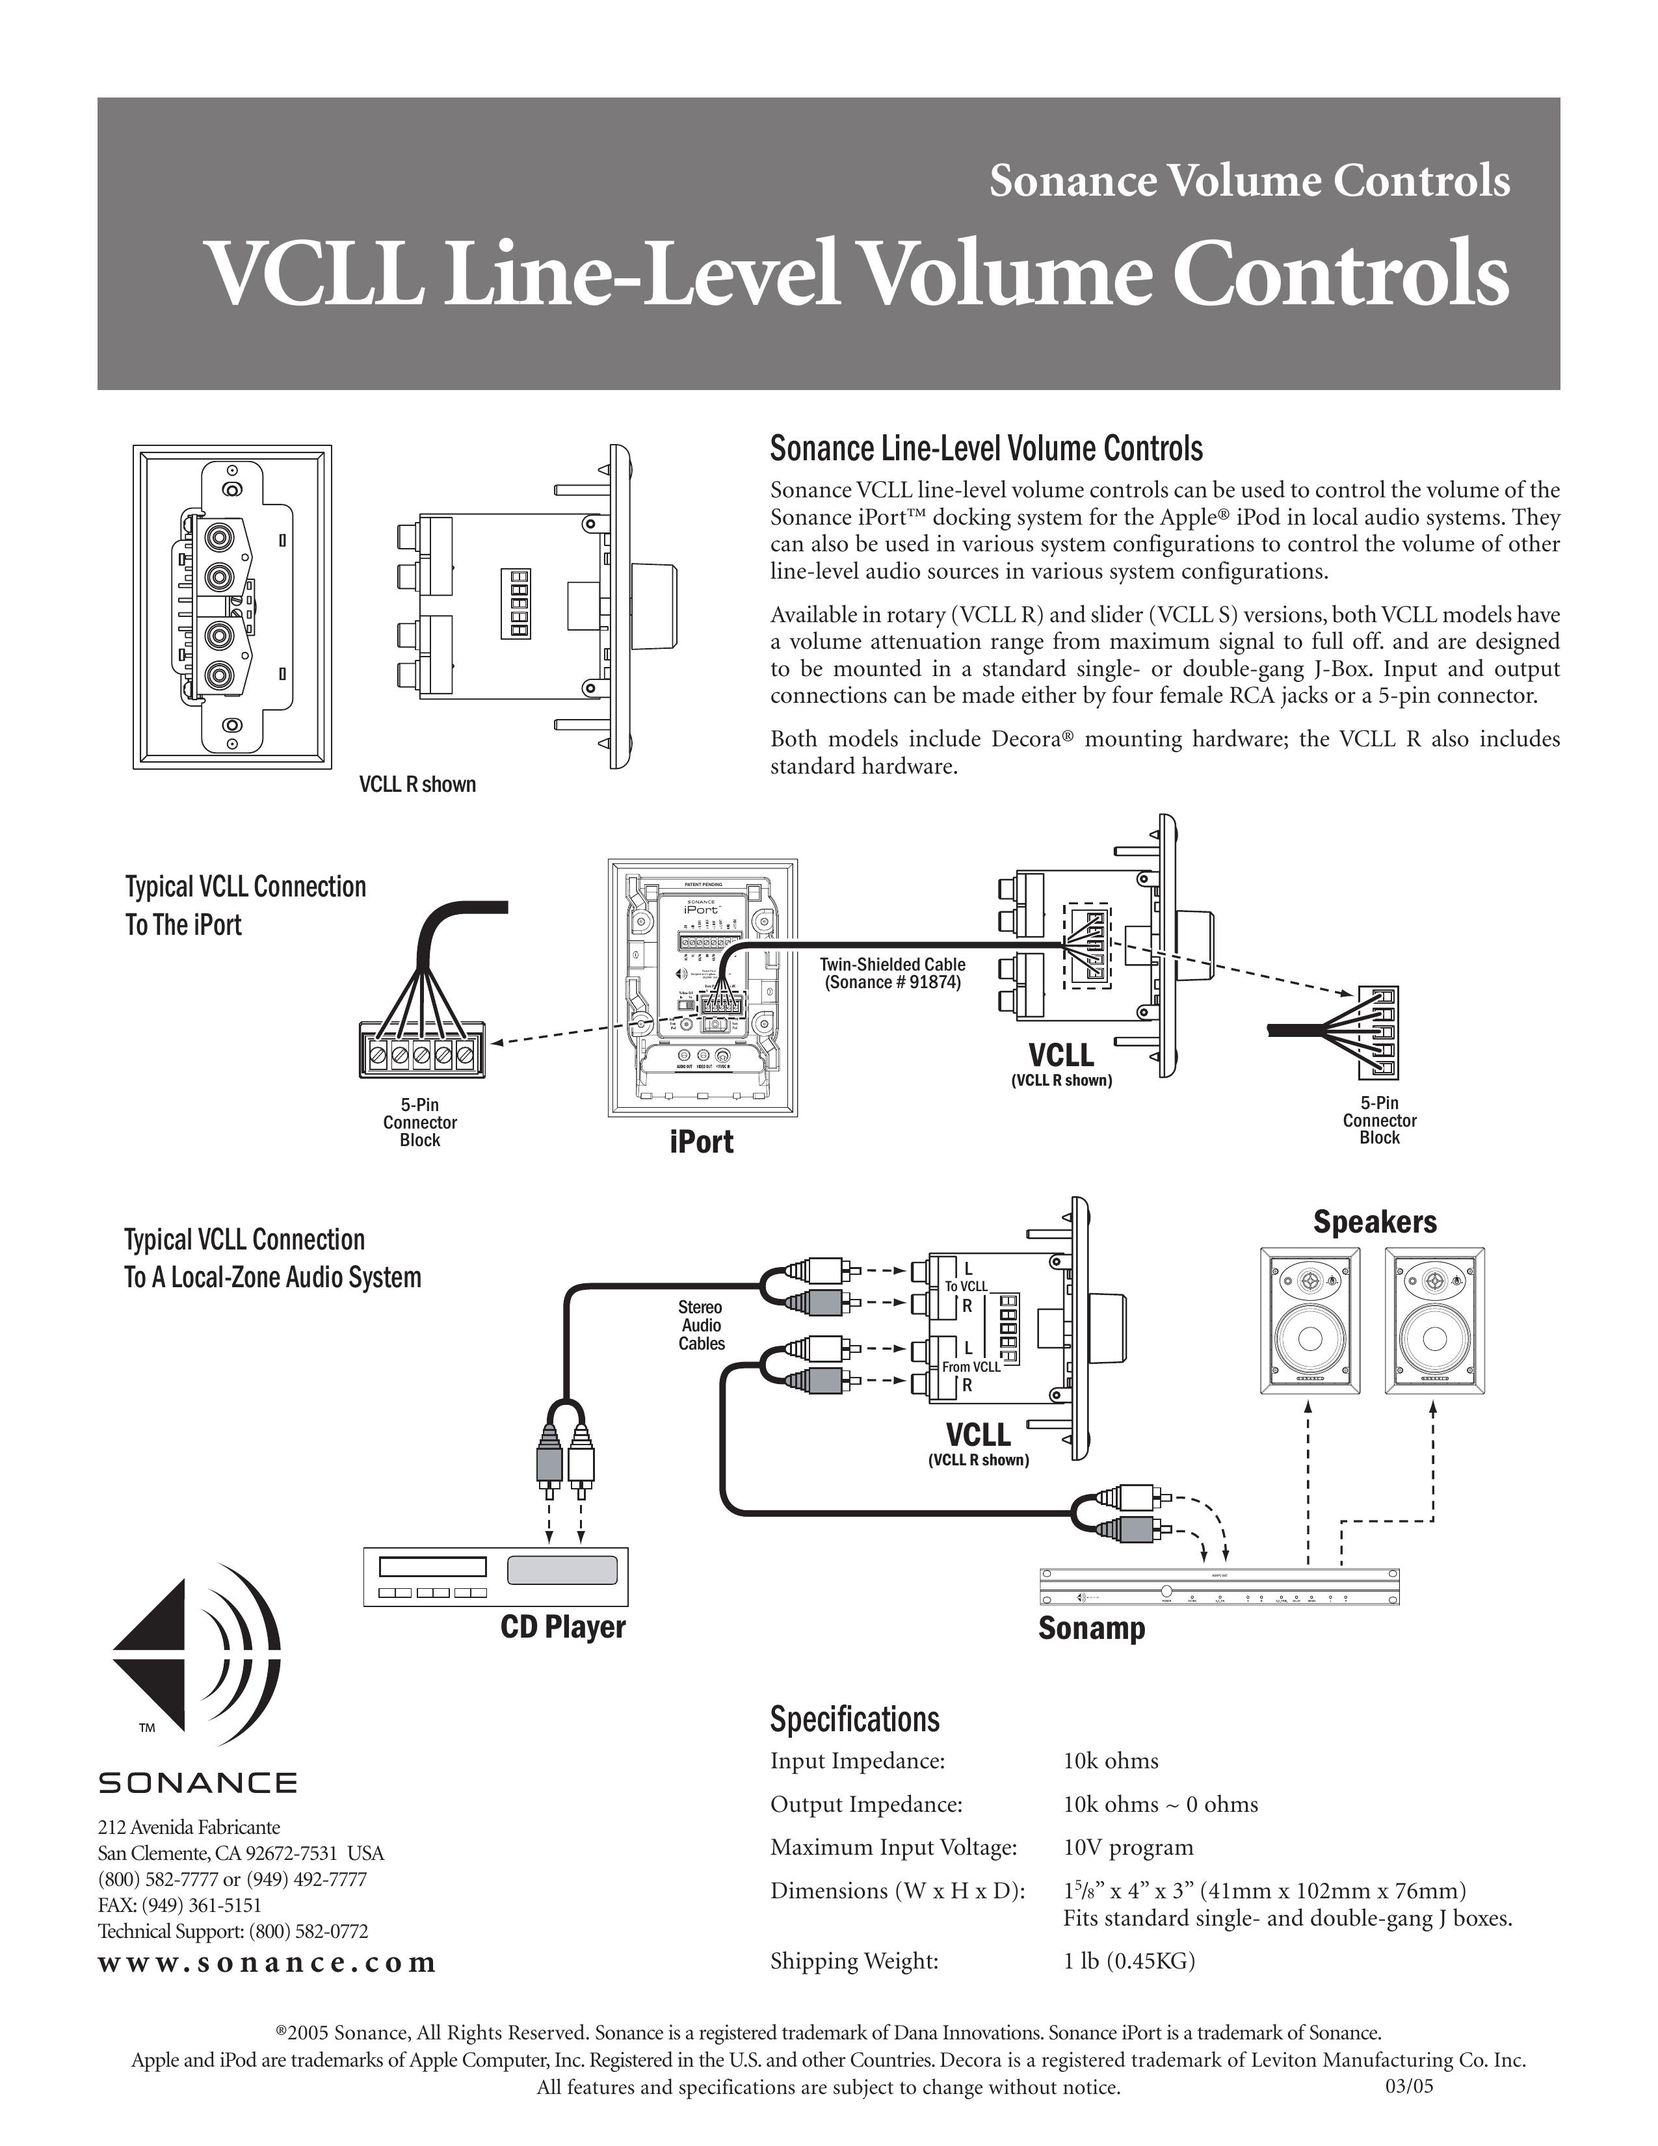 Sonance VCLL S Stereo System User Manual